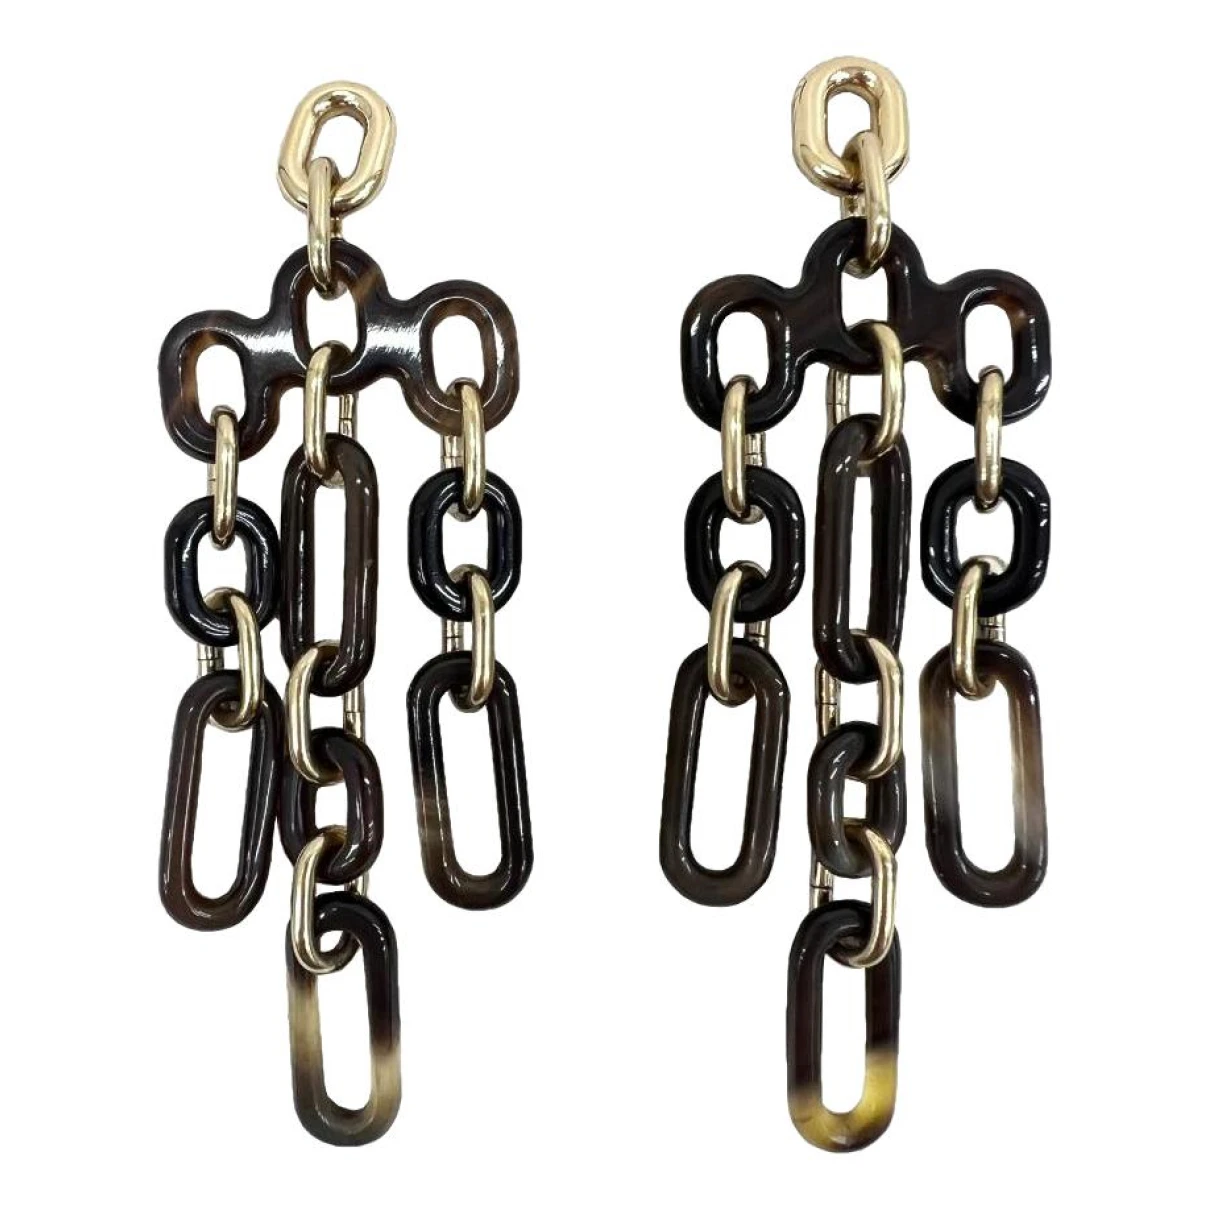 jewellery Hermès earrings for Female Metal. Used condition